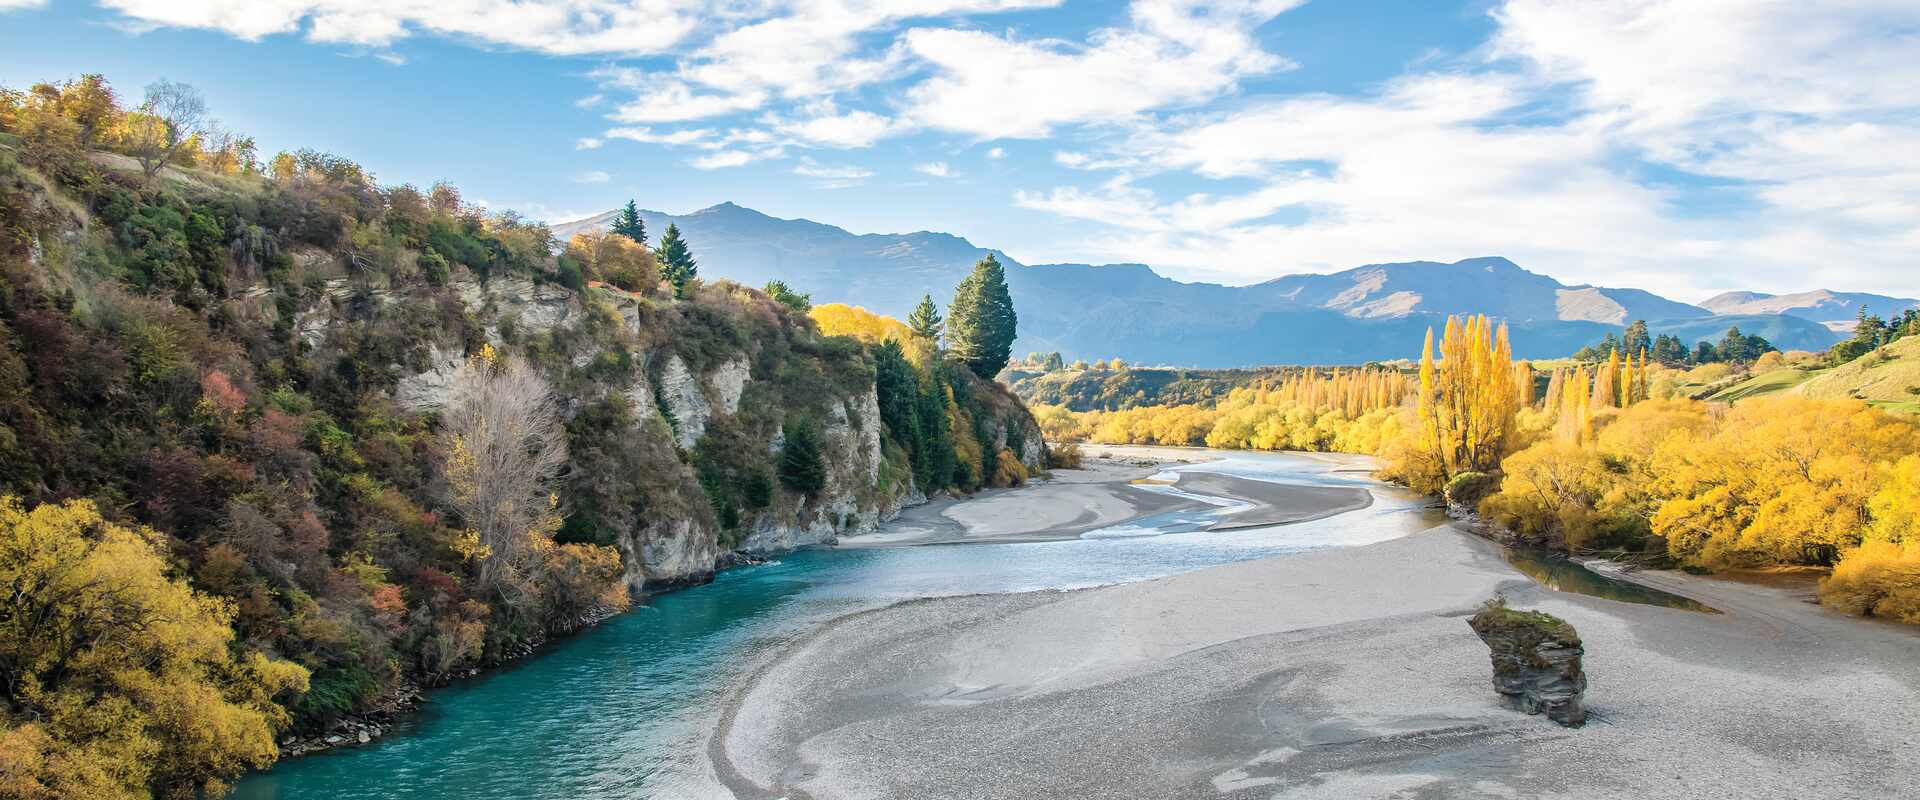 view down shotover river at arrowtown south island nz 12 5